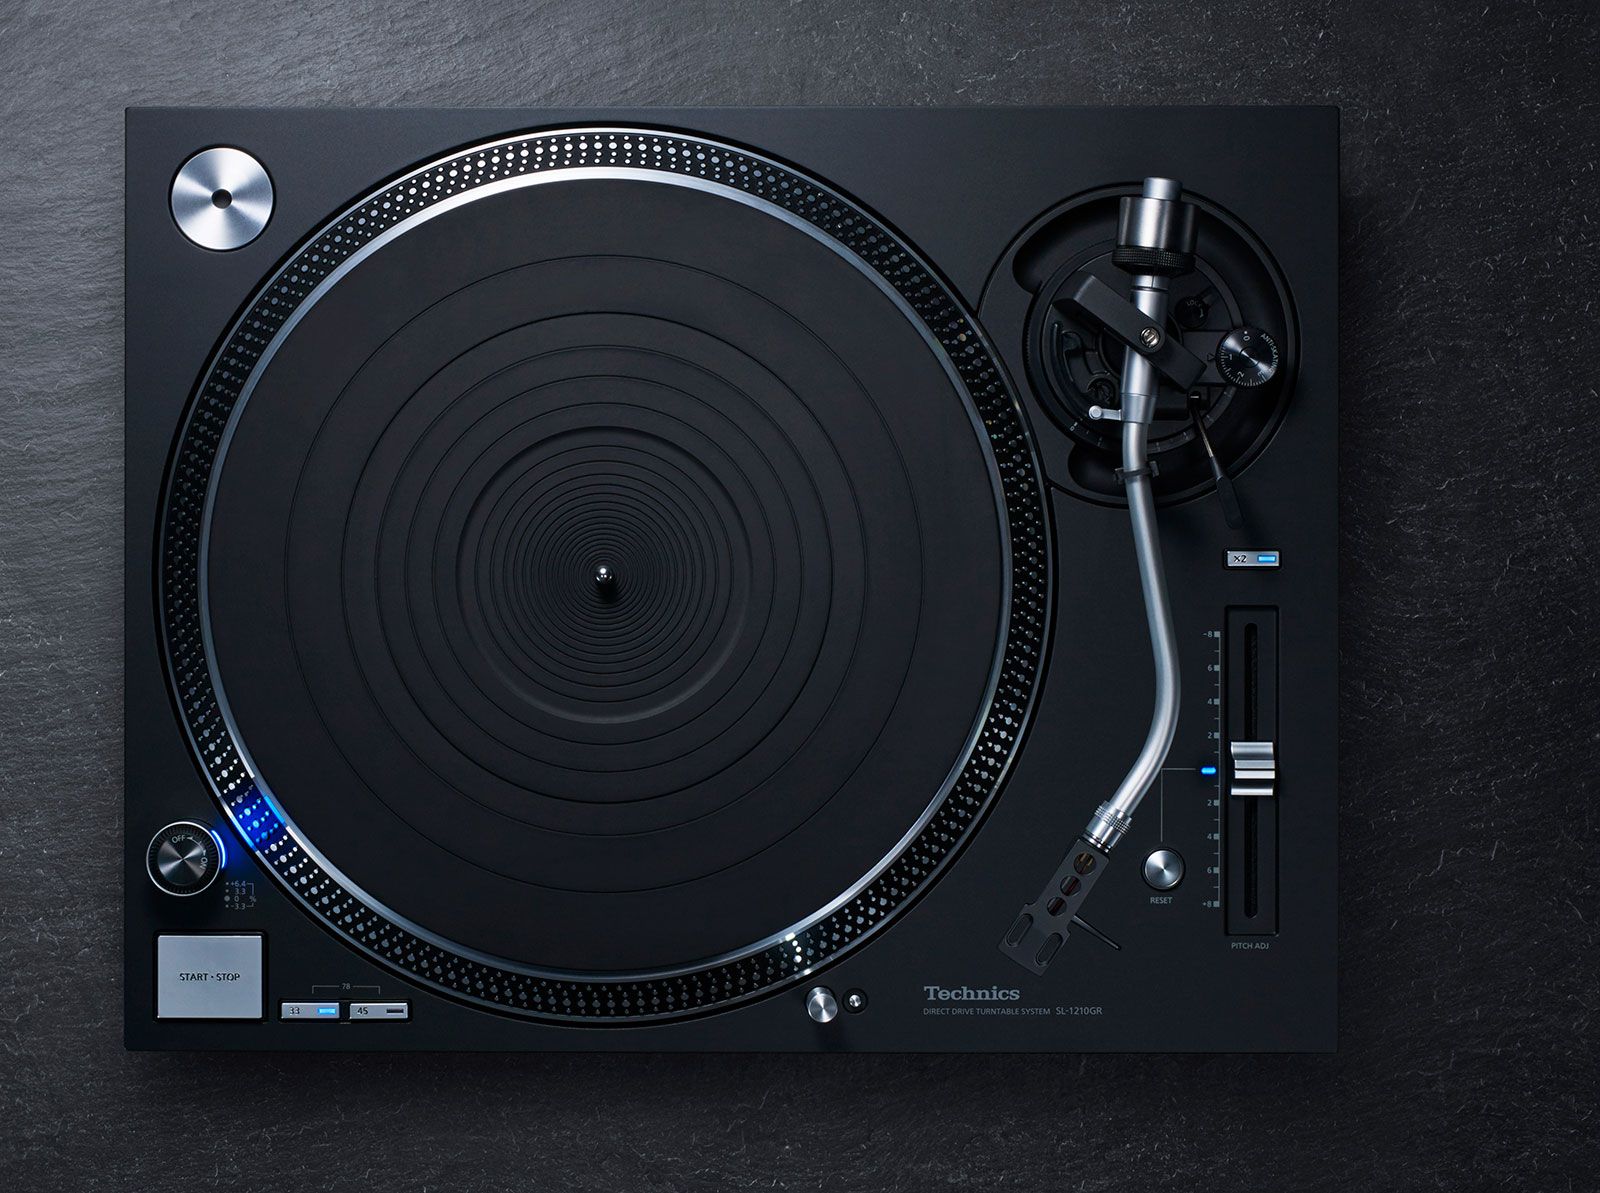 return of an icon technics sl 1200gr and black sl 1210gr turntables to launch in april for 1299 a piece image 1